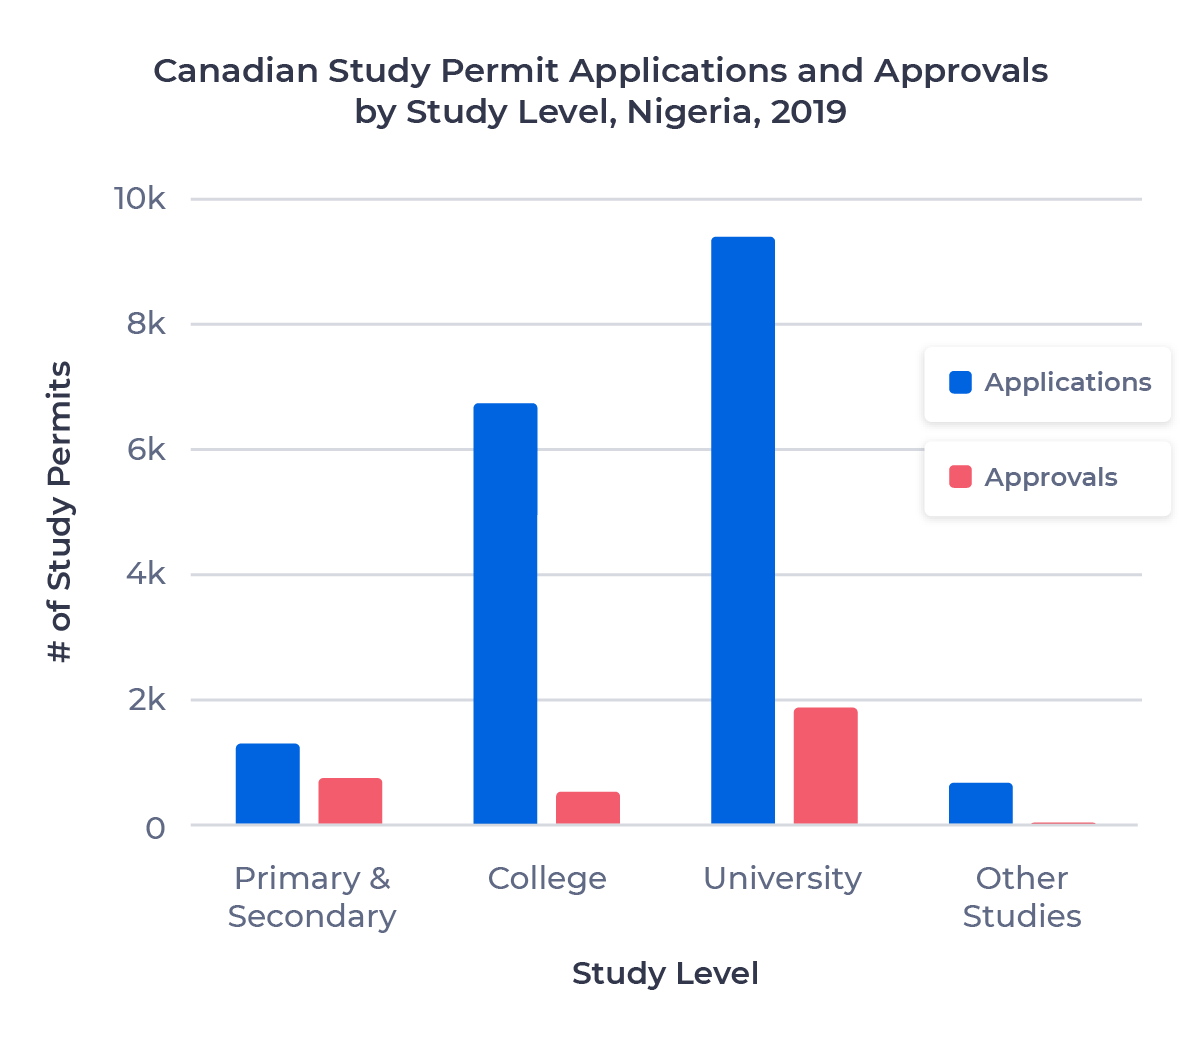 Vertical bar chart showing the number of study permit applications and approvals issued in 2019 to Nigerian students based on grouped study level